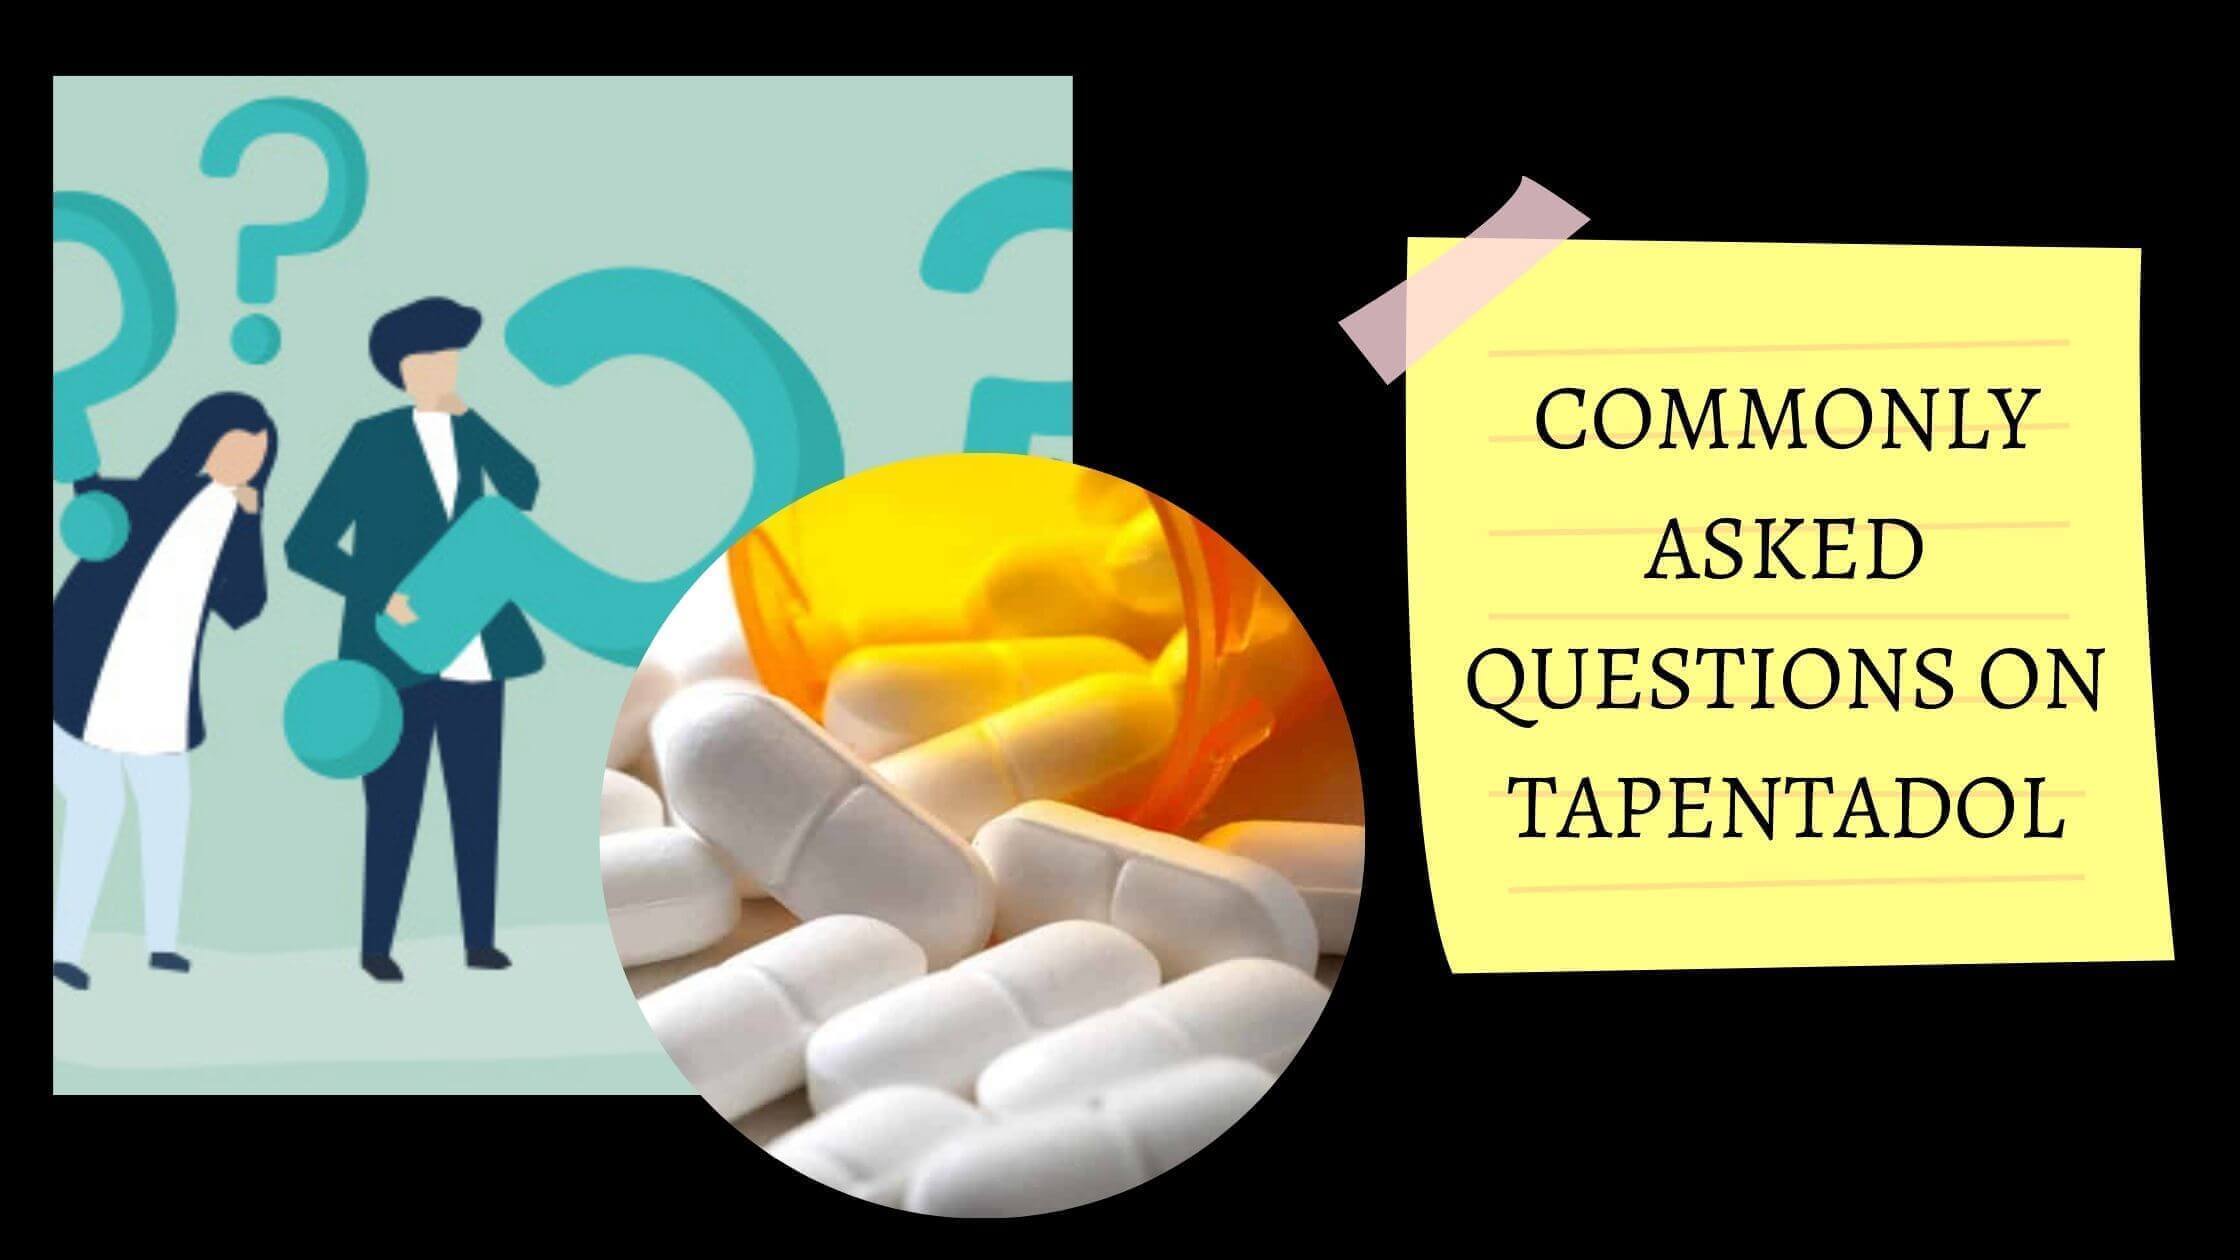 Commonly asked questions about Tapentadol